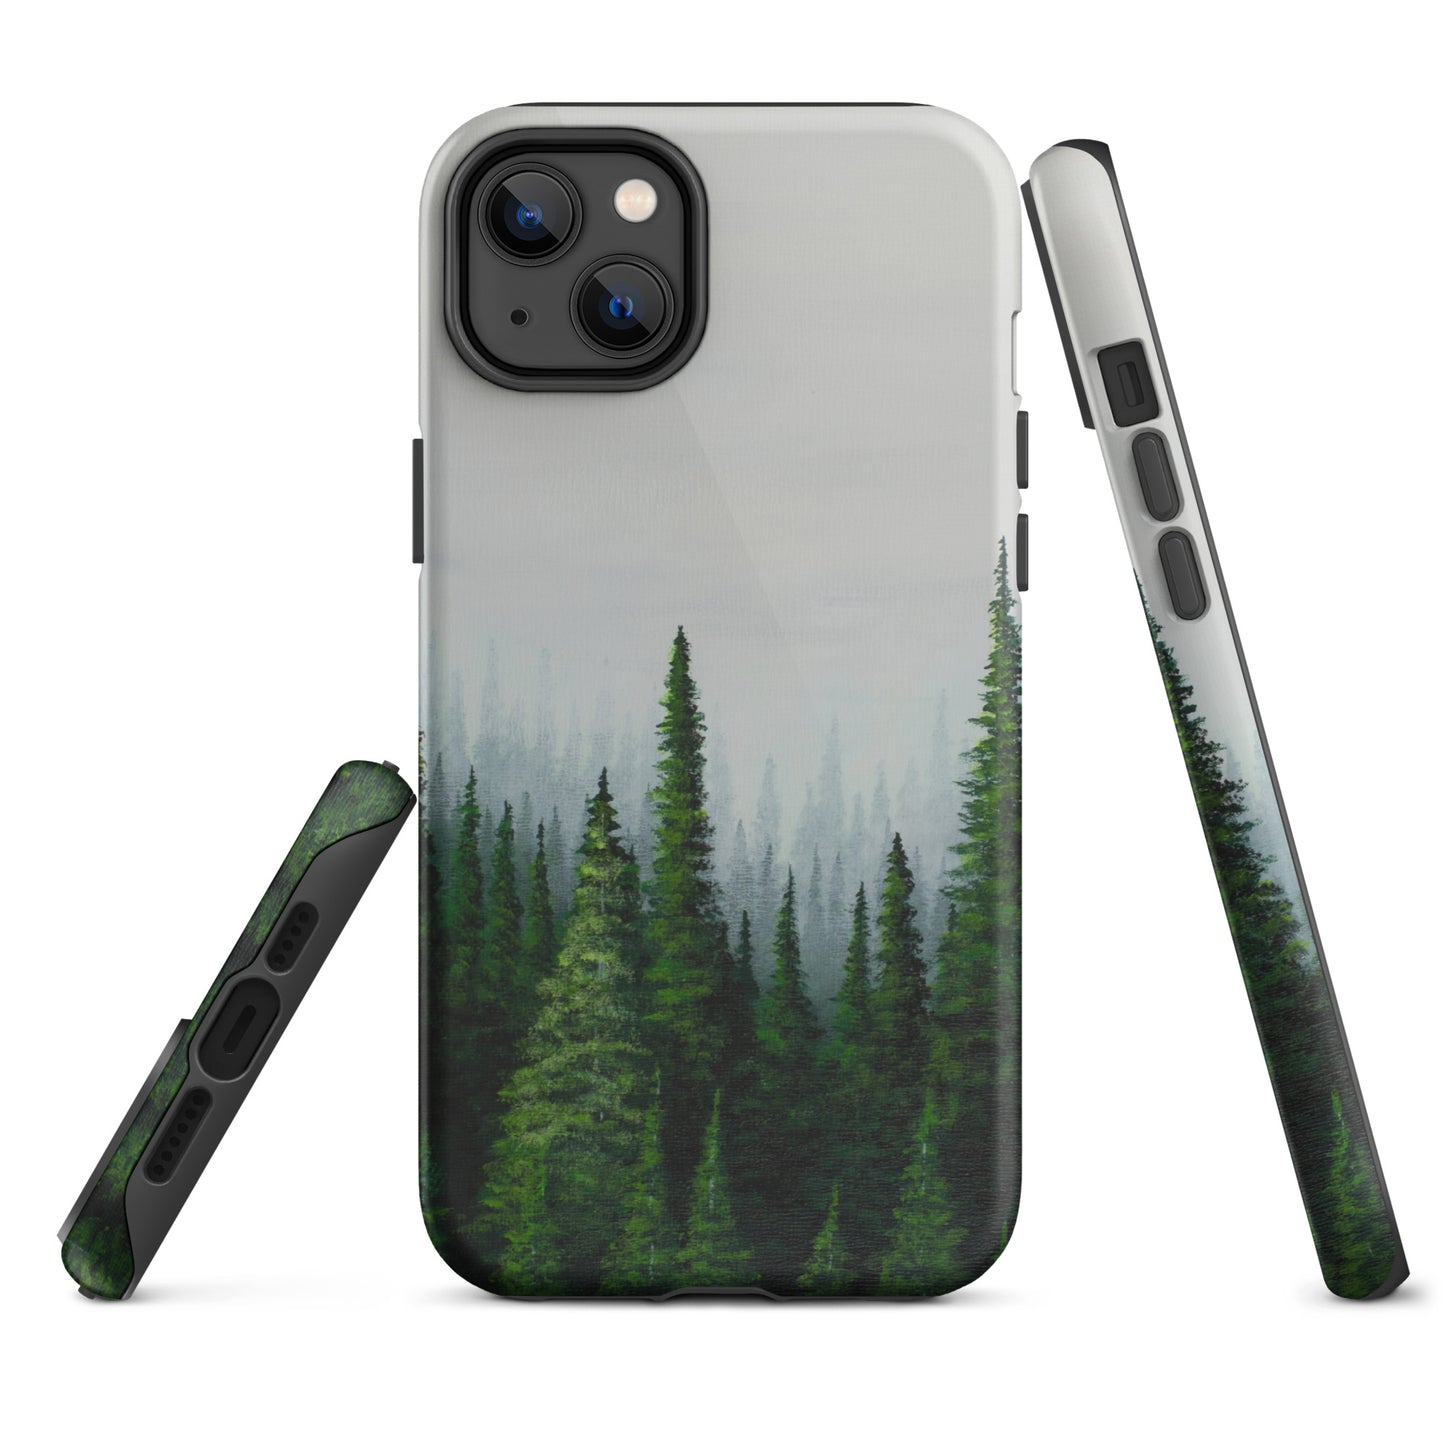 Lost in Moments Tough iPhone case